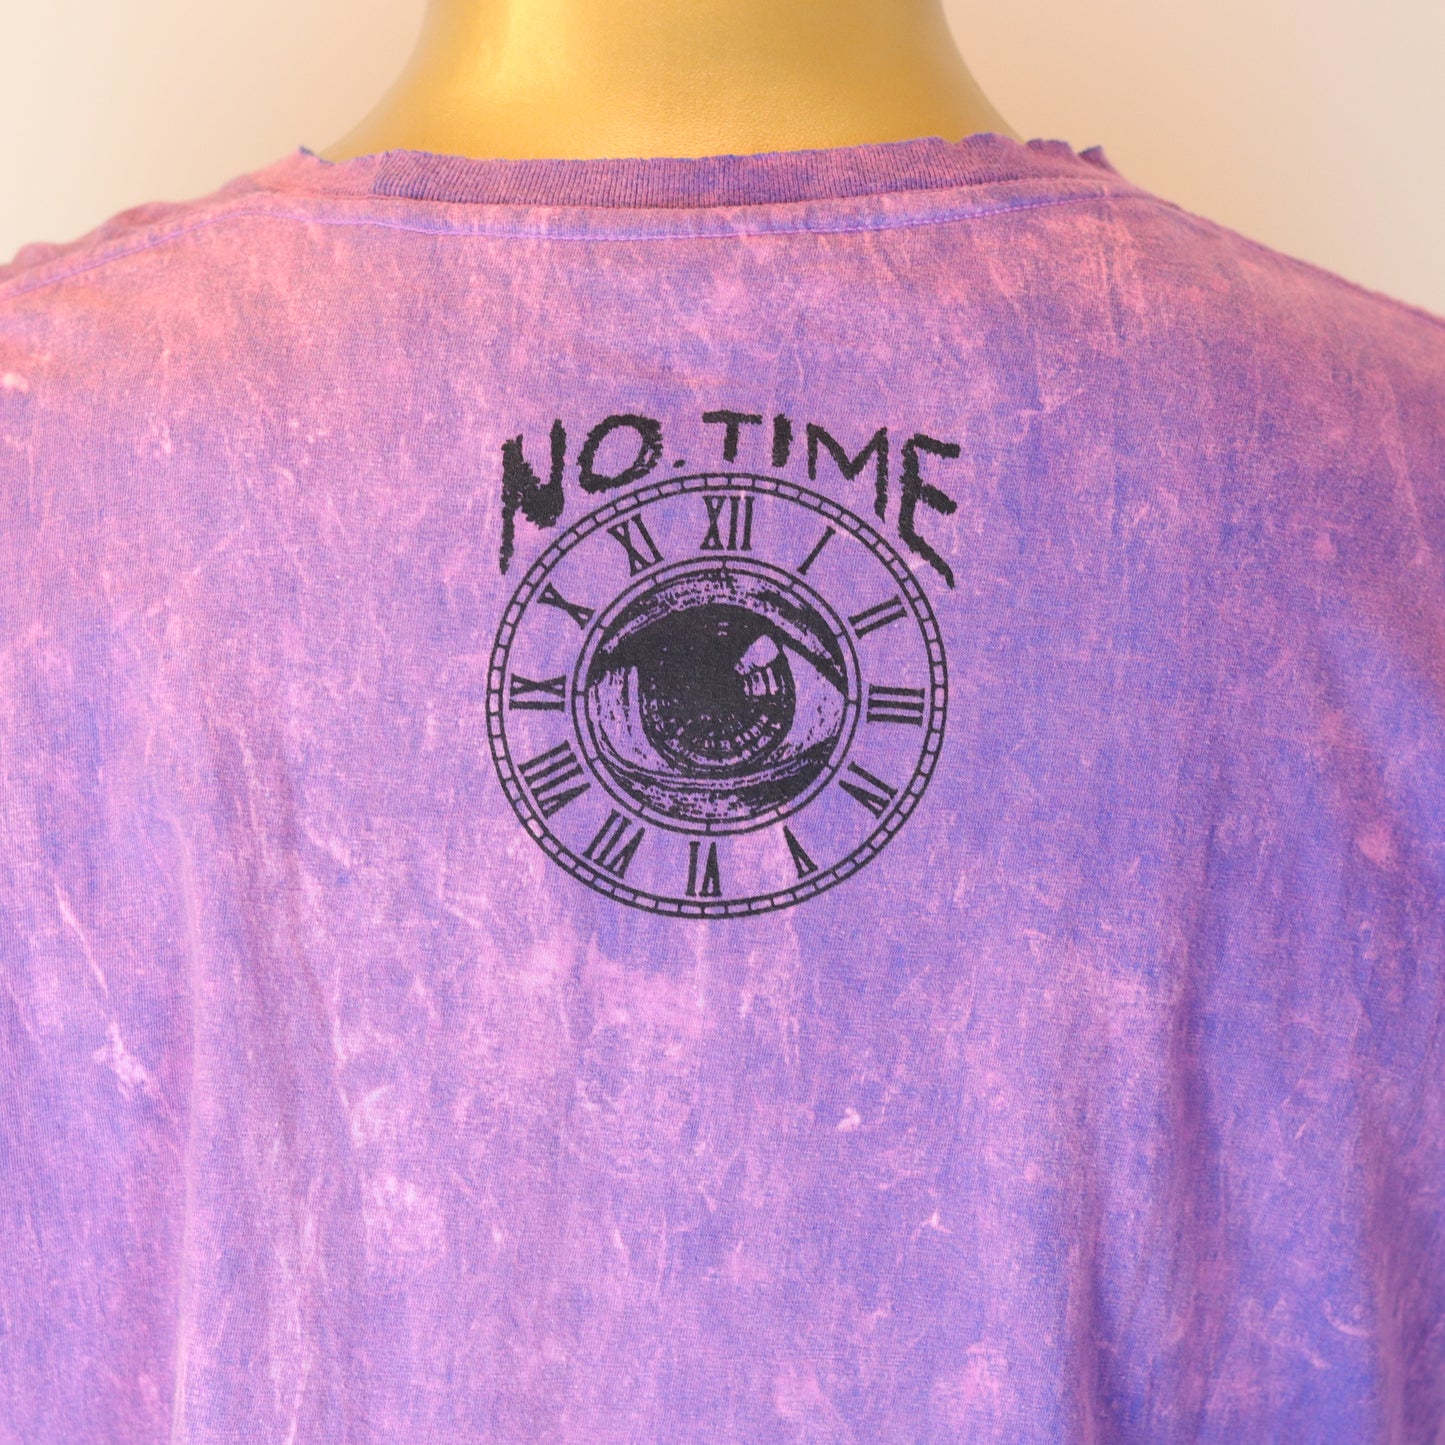 The 4 Beatles Orchid Stonewash Men's T-shirt By No Time